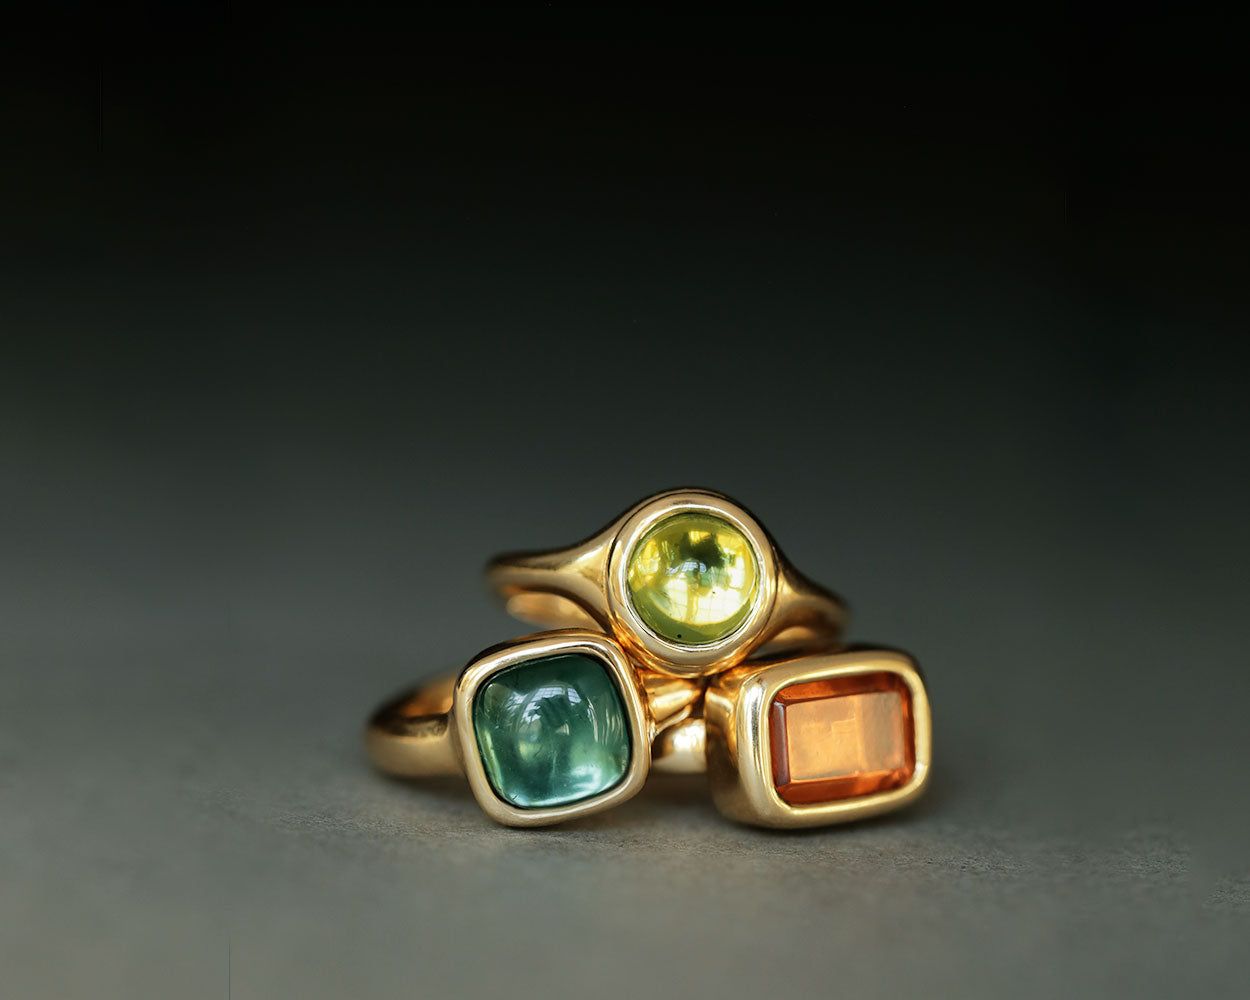 Three gemstone rings by George Rings Sophia Ring in blue green tourmaline Duchess ring in peridot and Empire ring in orange sapphire lost wax casting solid 18k gold